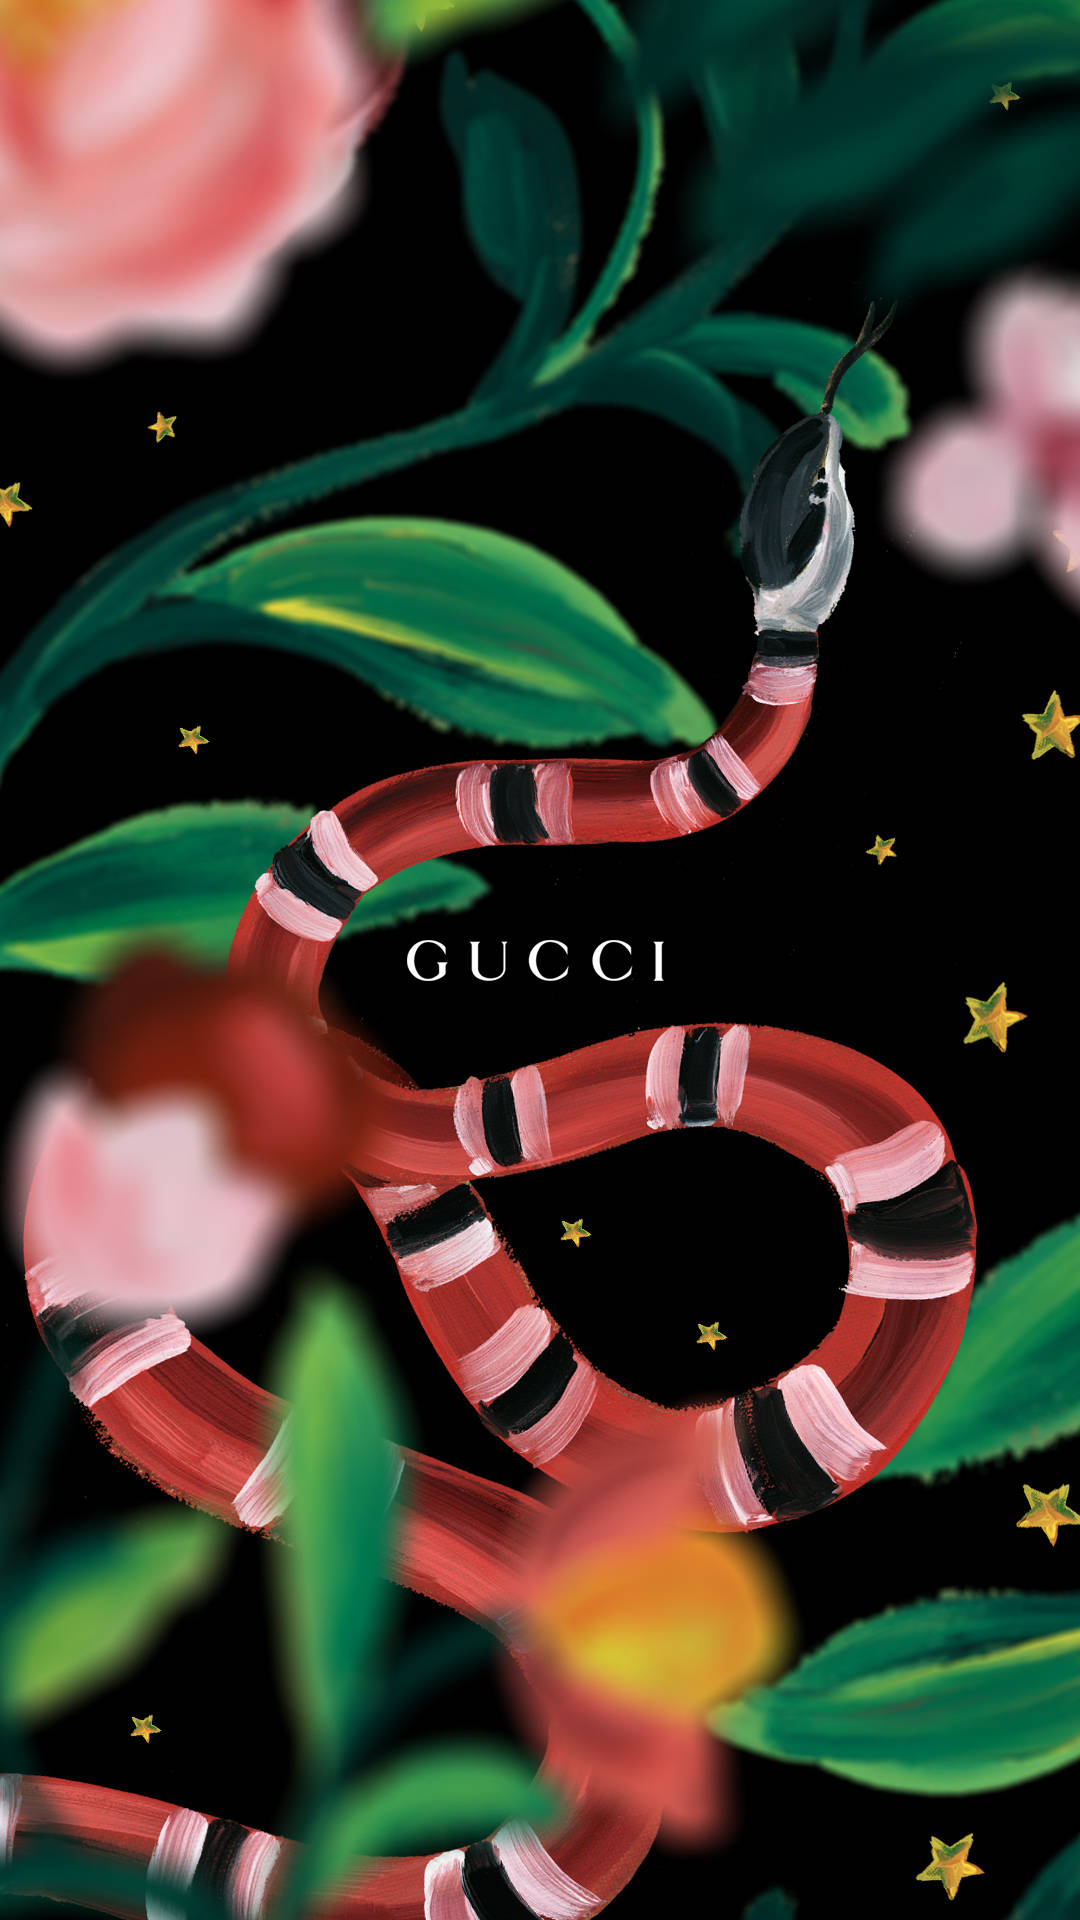 Snake Gucci Iphone Background Wallpaper